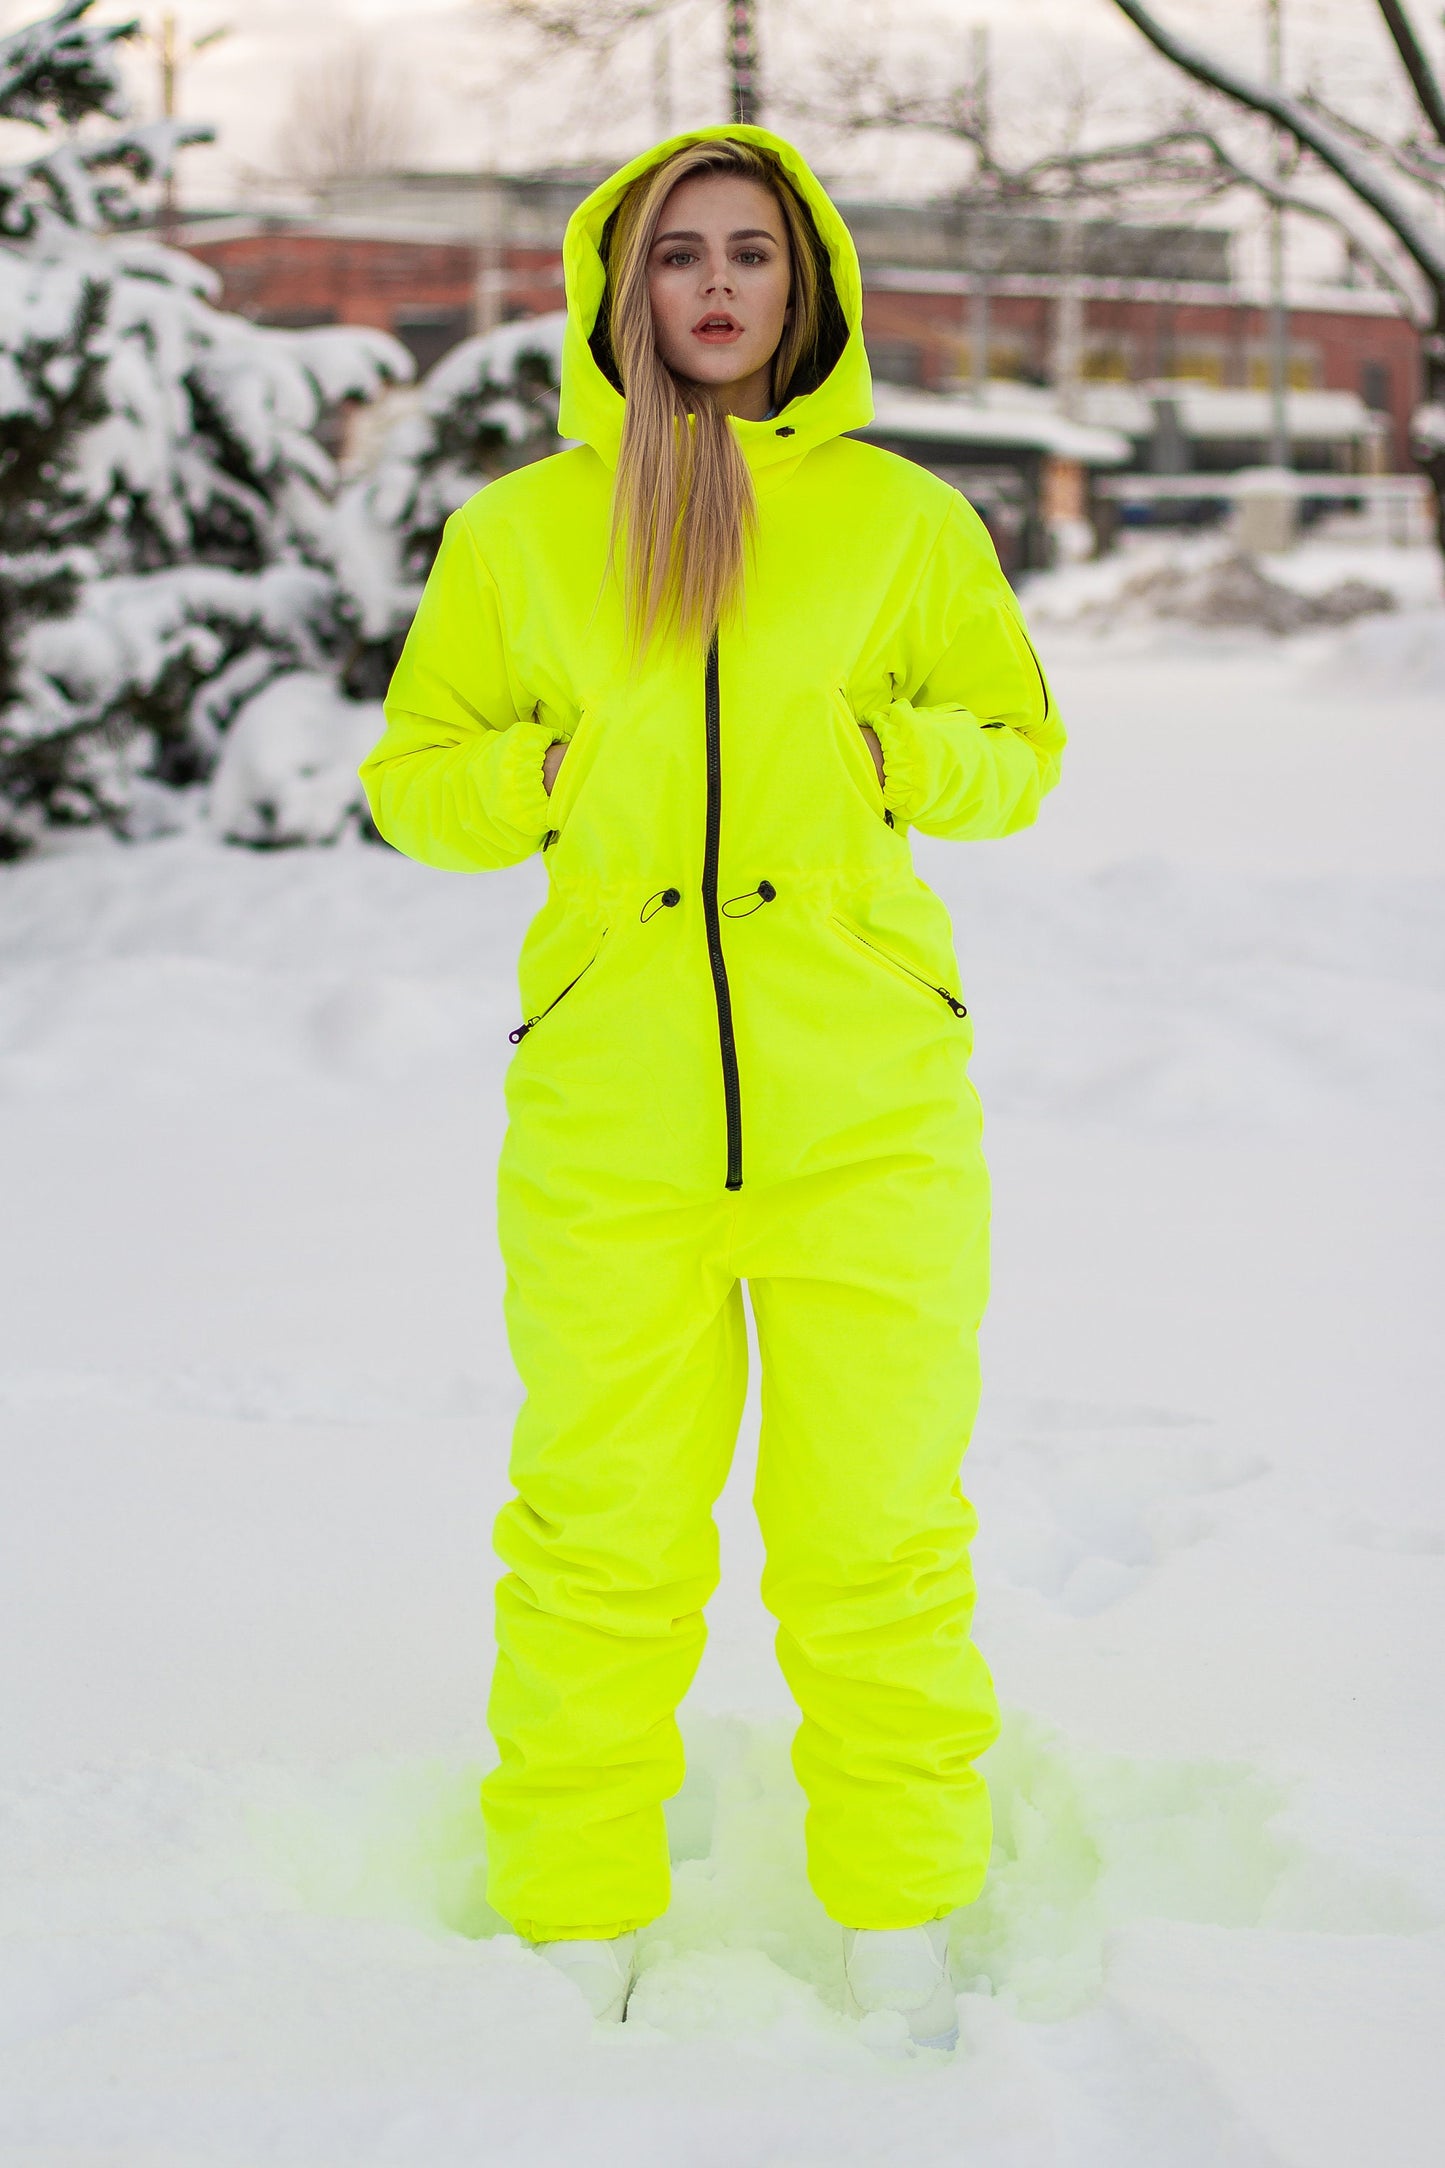 Winter jumpsuit, snowboard clothes, Snowboard suit, Skiing Overall, ski suit women, sportswear, Jumpsuit winter, Colorful Snow Suit,